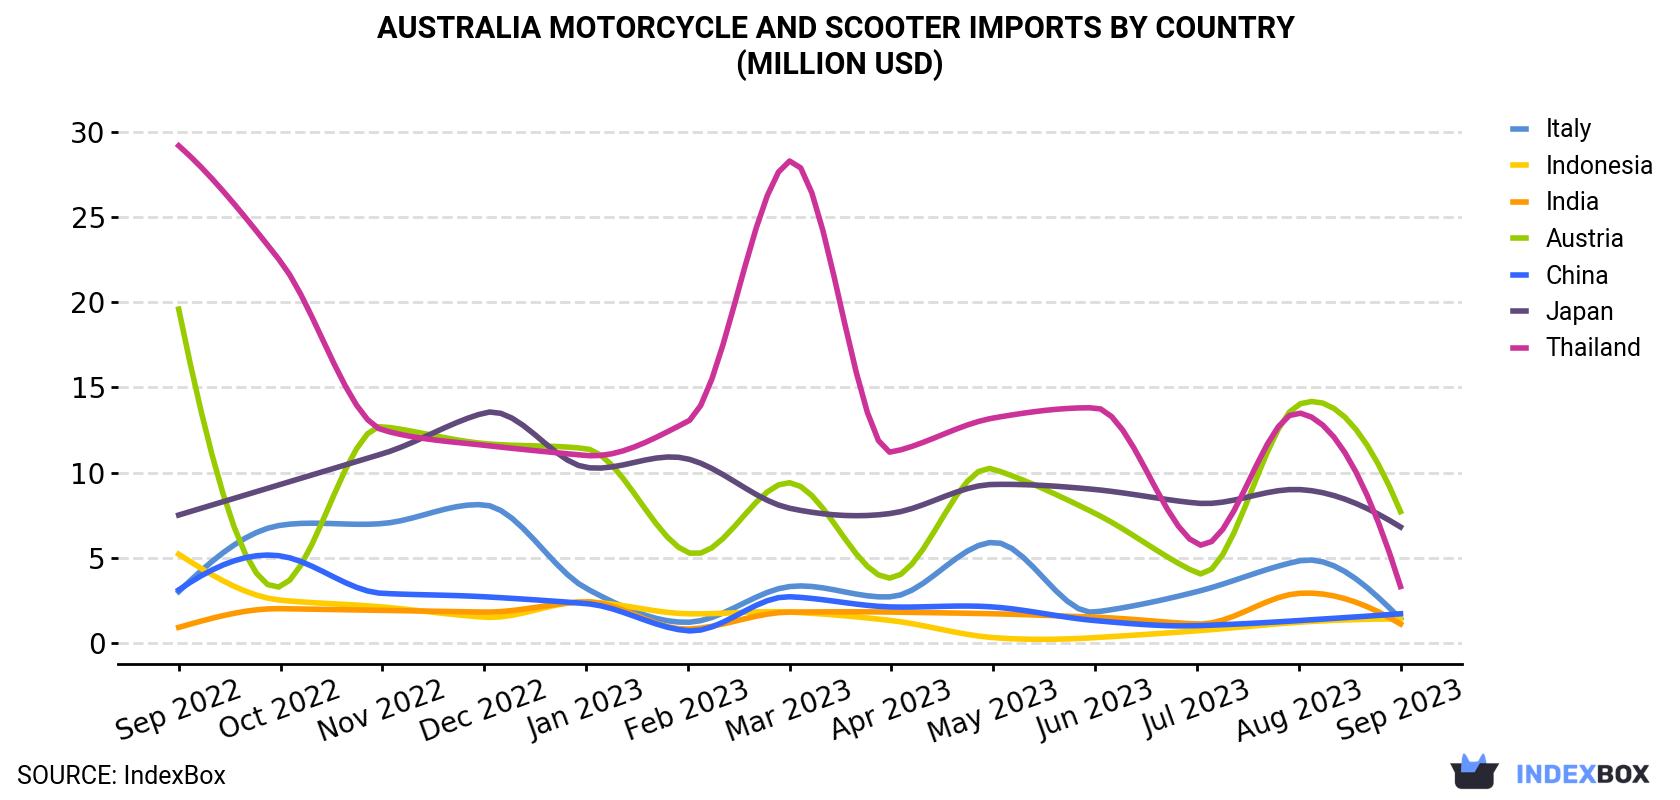 Australia Motorcycle and Scooter Imports By Country (Million USD)